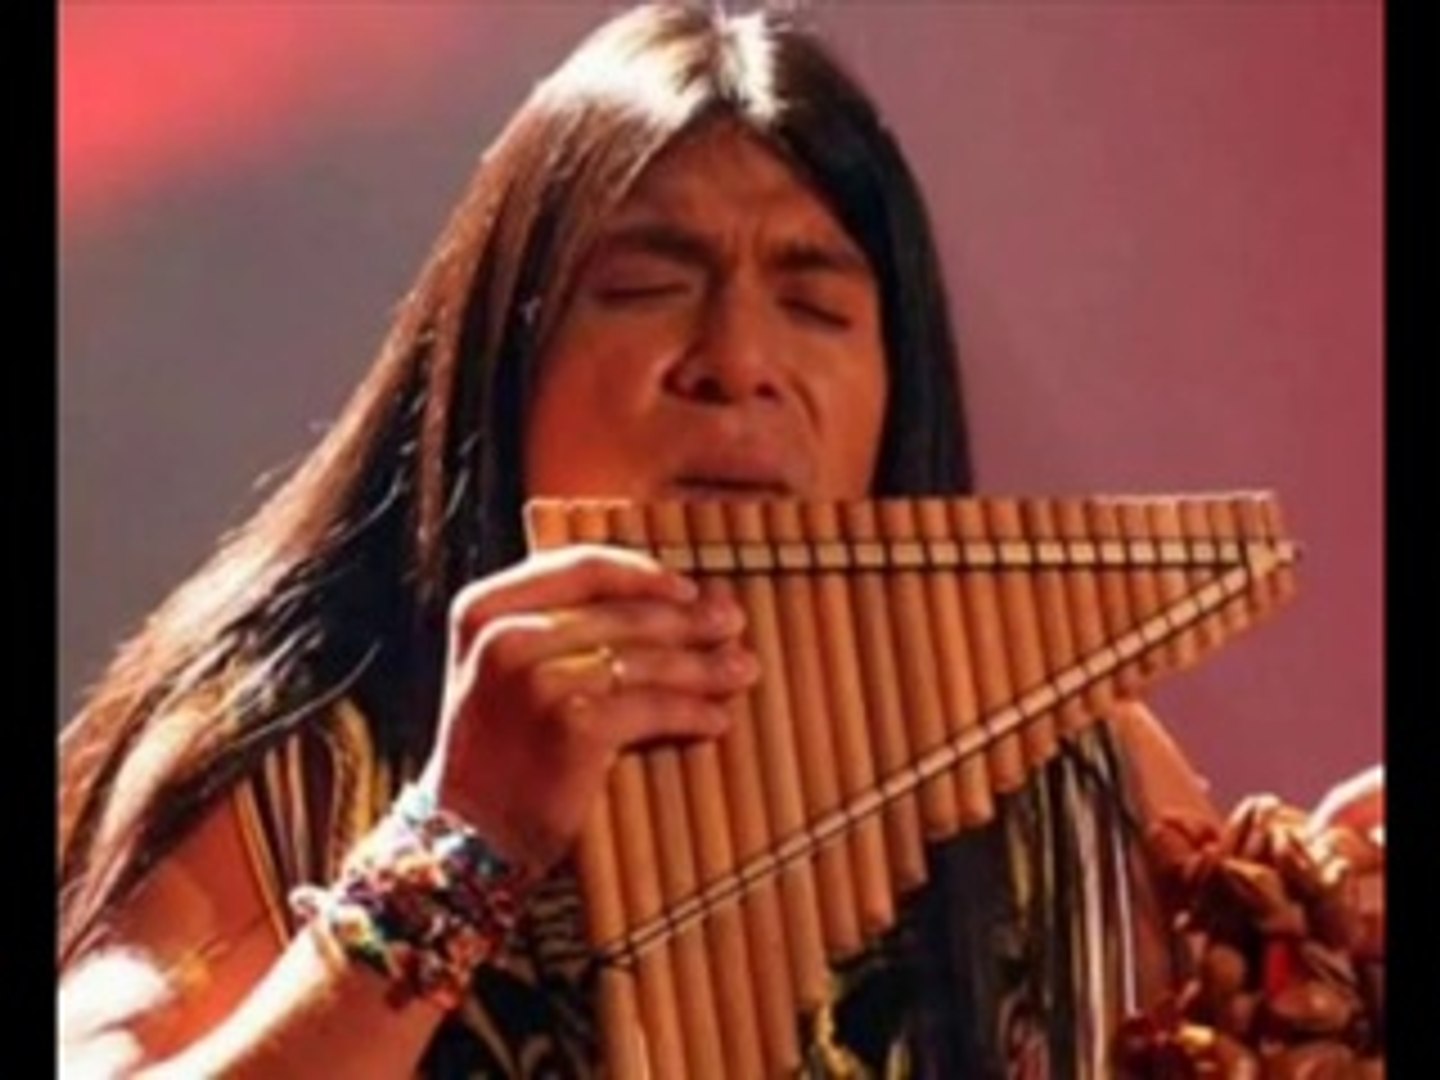 Leo Rojas - Pastor Solitario - The Last of the Mohicans - Dailymotion Video